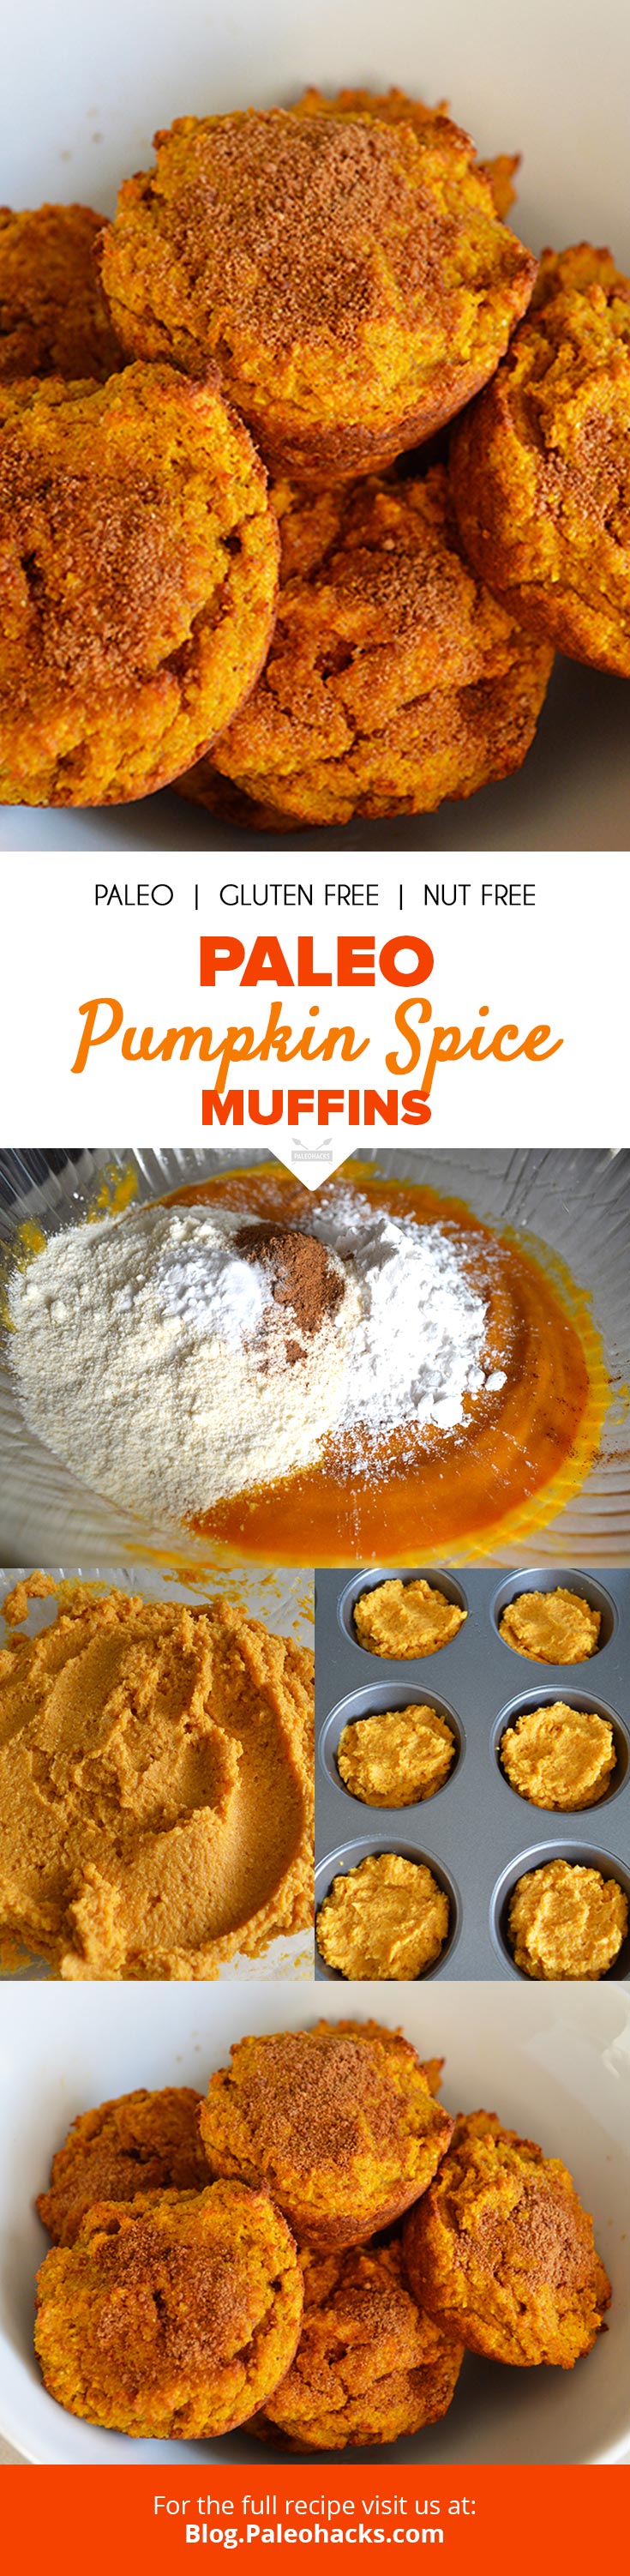 Need a fresh baked treat to get you through busy mornings? Try these fluffy, warm and moist pumpkin spice muffins. These muffins will sweeten up breakfast.